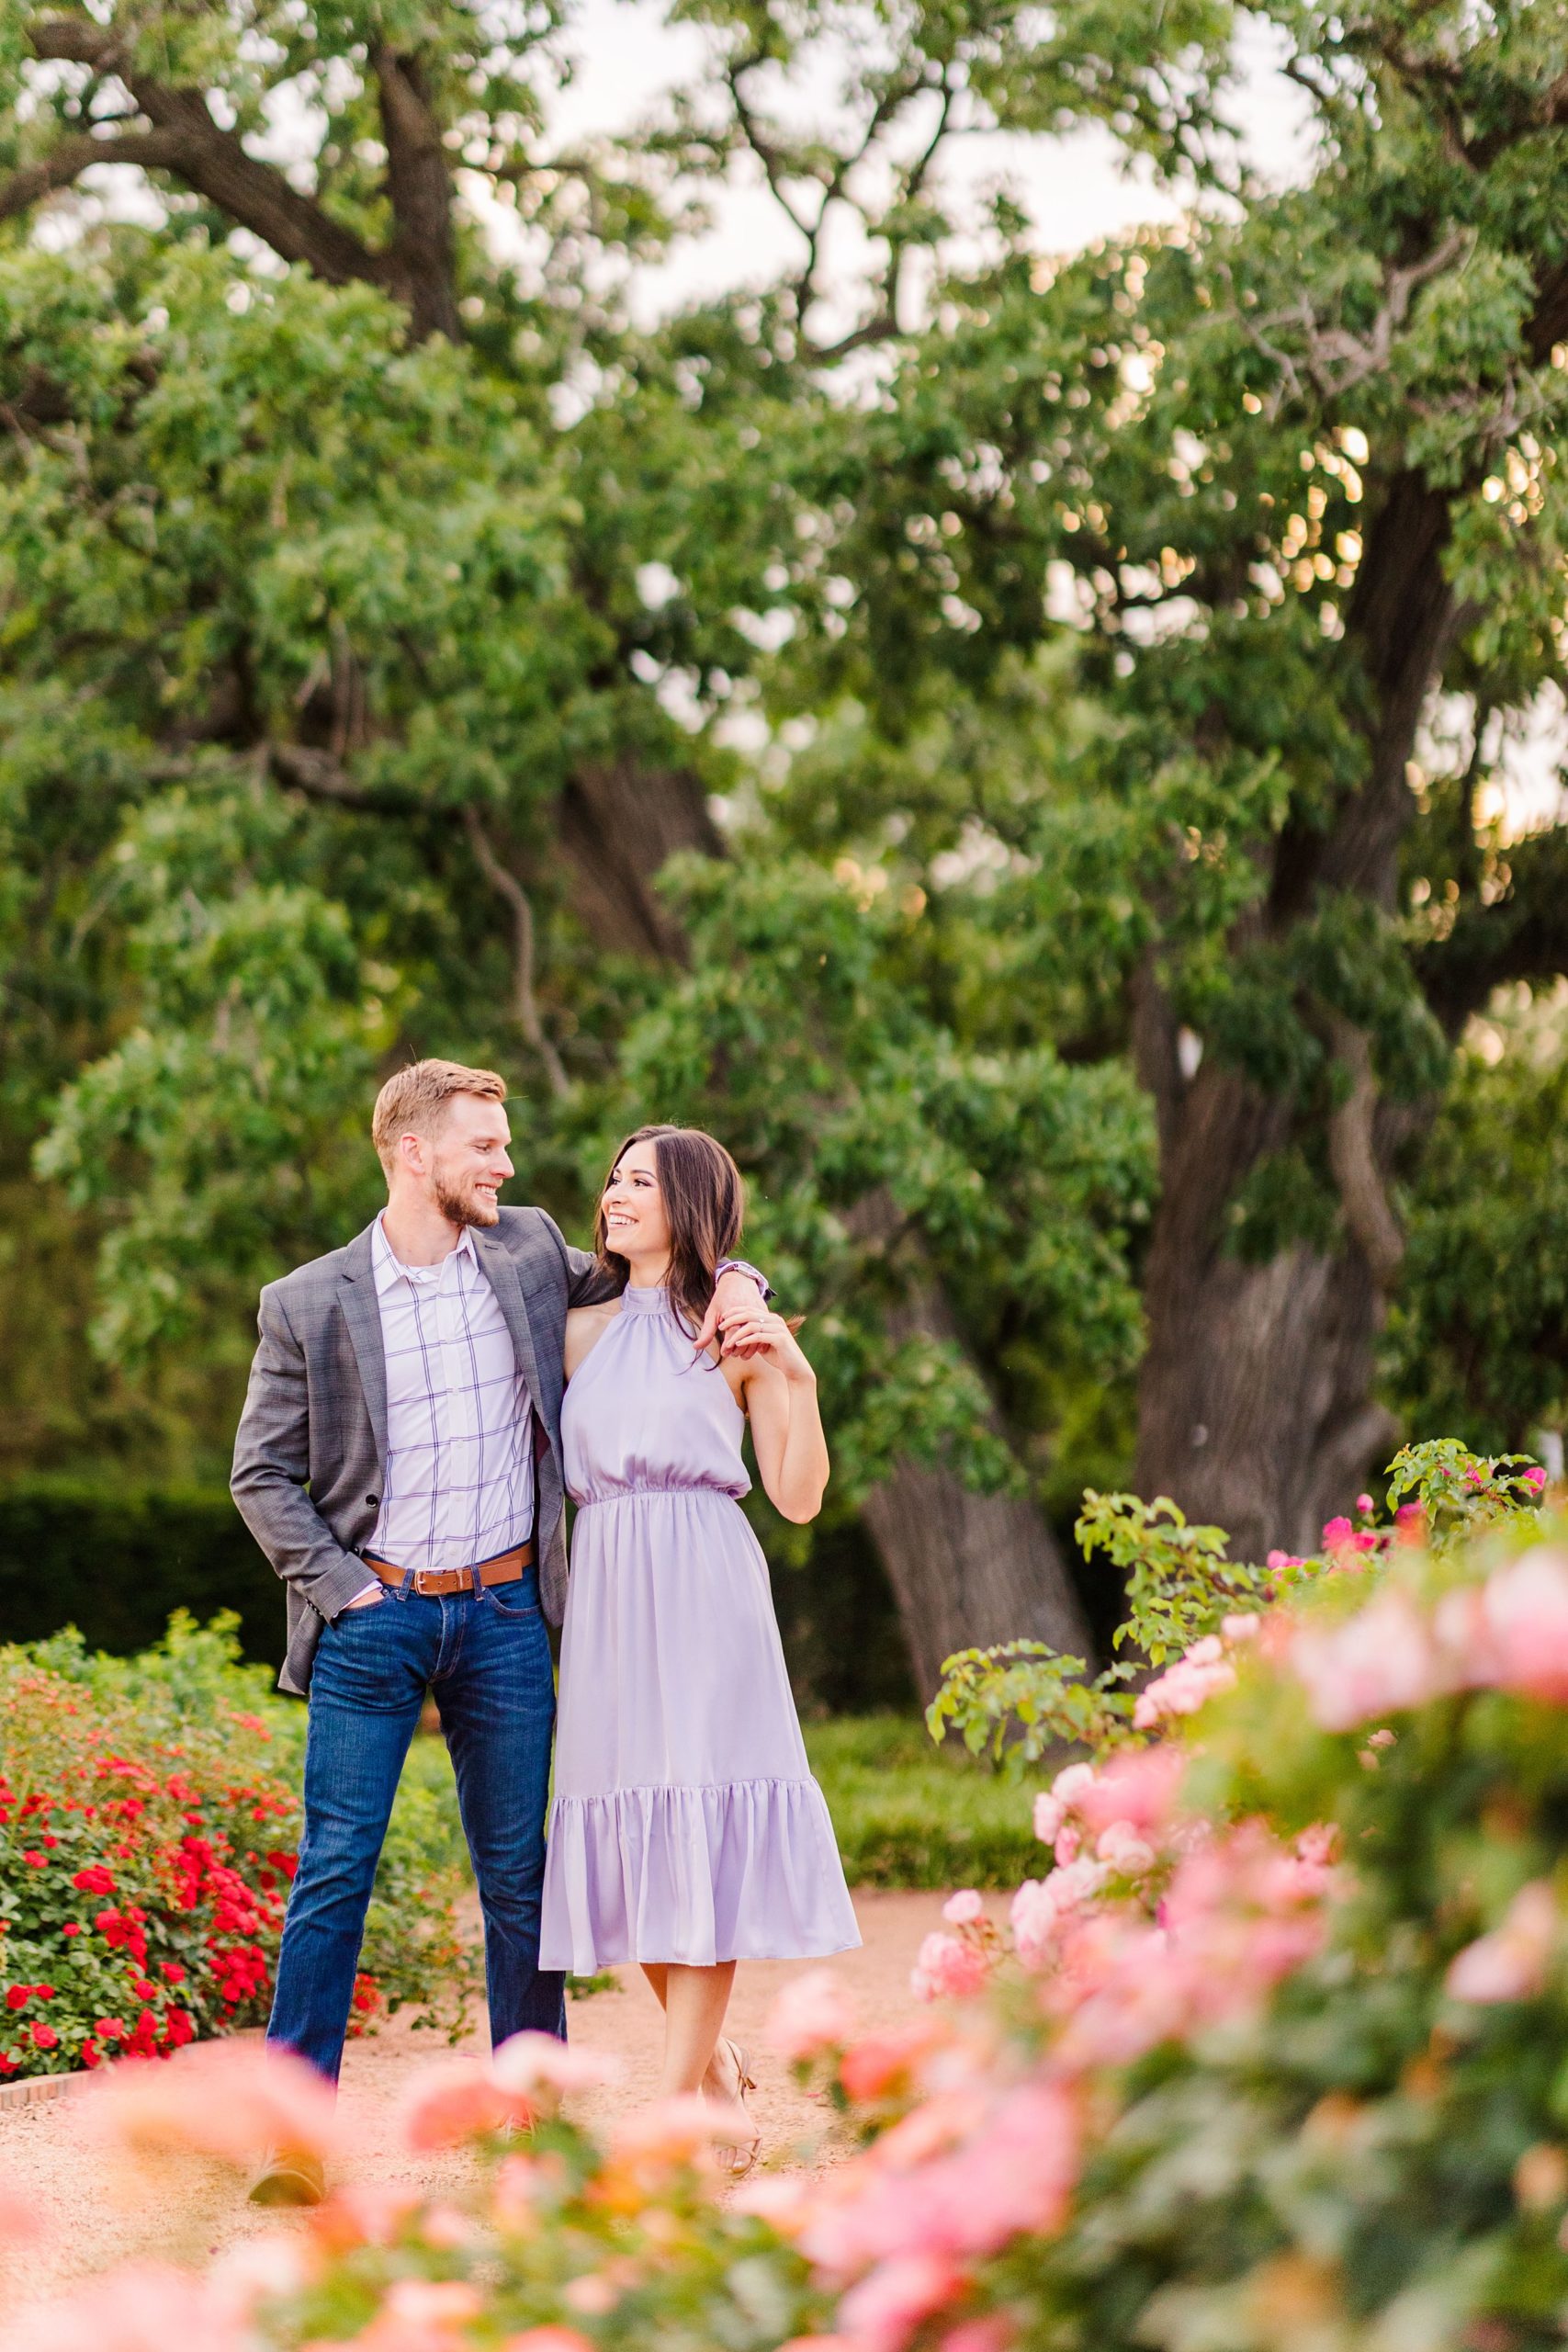 Couple Celebrate their engagement in Cantigny Park in Wheaton, Illinois. Photo taken by Austin Wedding Photographers, Joanna and Brett